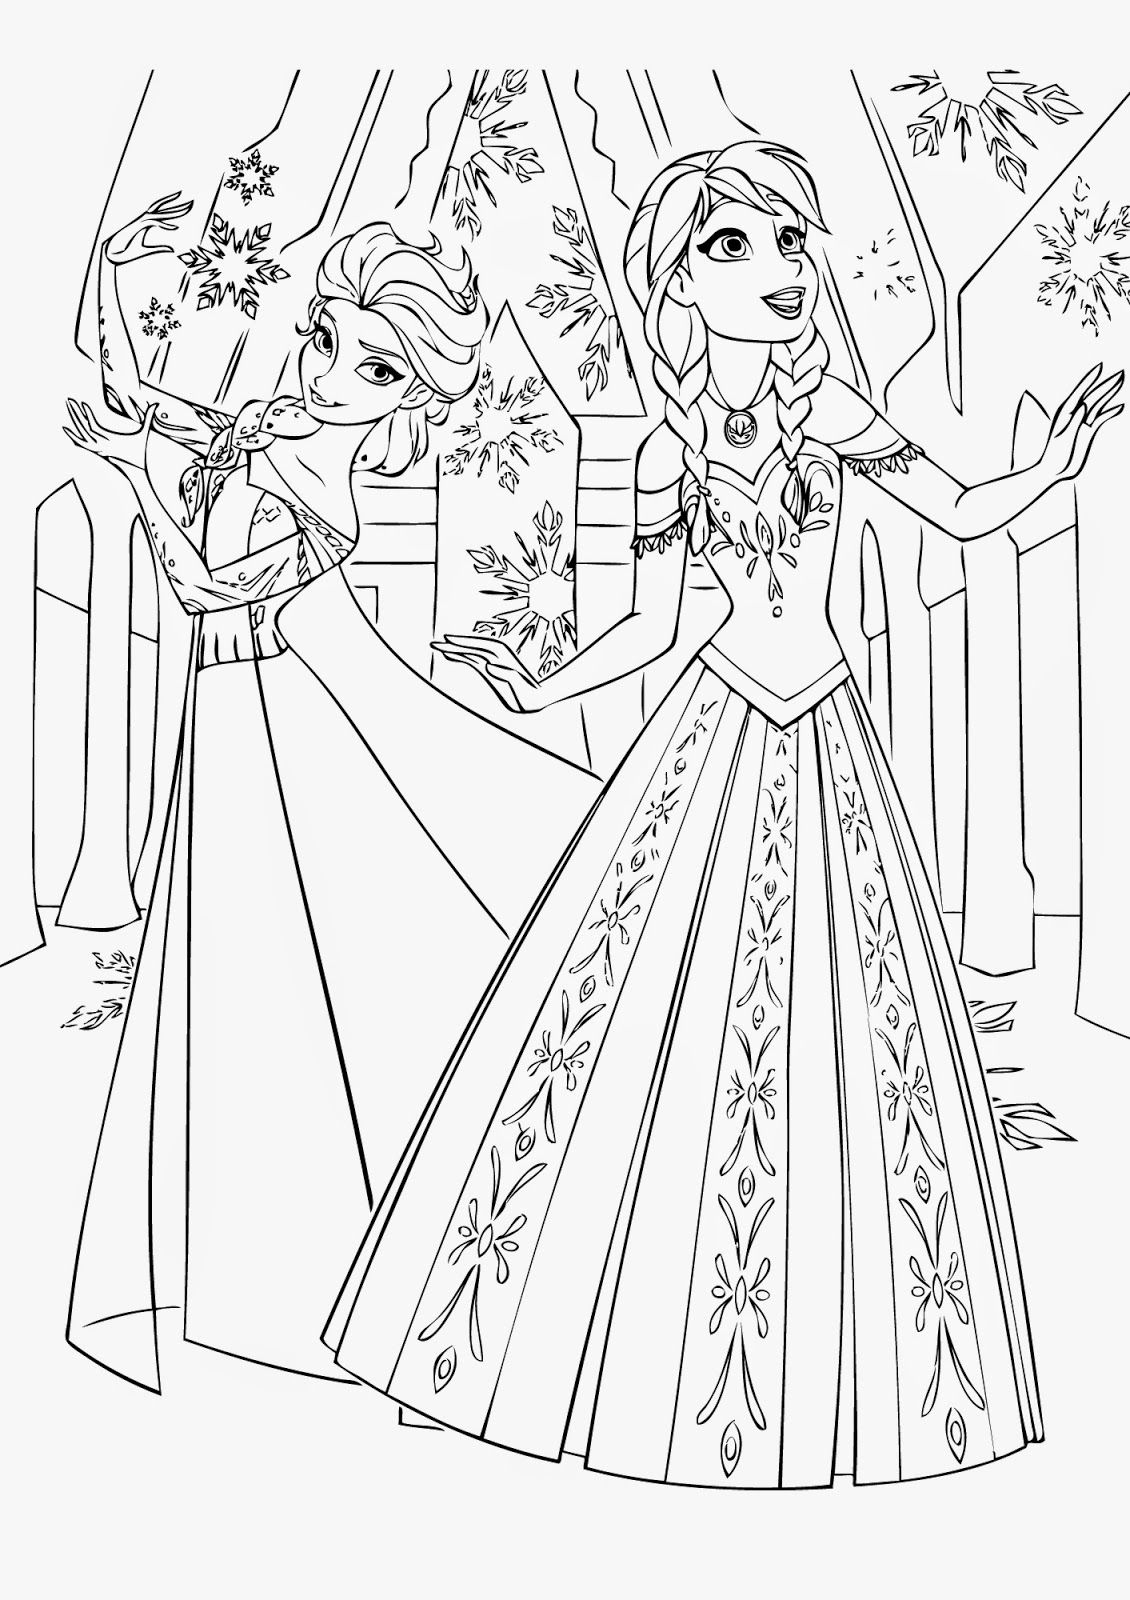 Download Find 16 Awesome Frozen Coloring Pages to Print ~ Instant ...